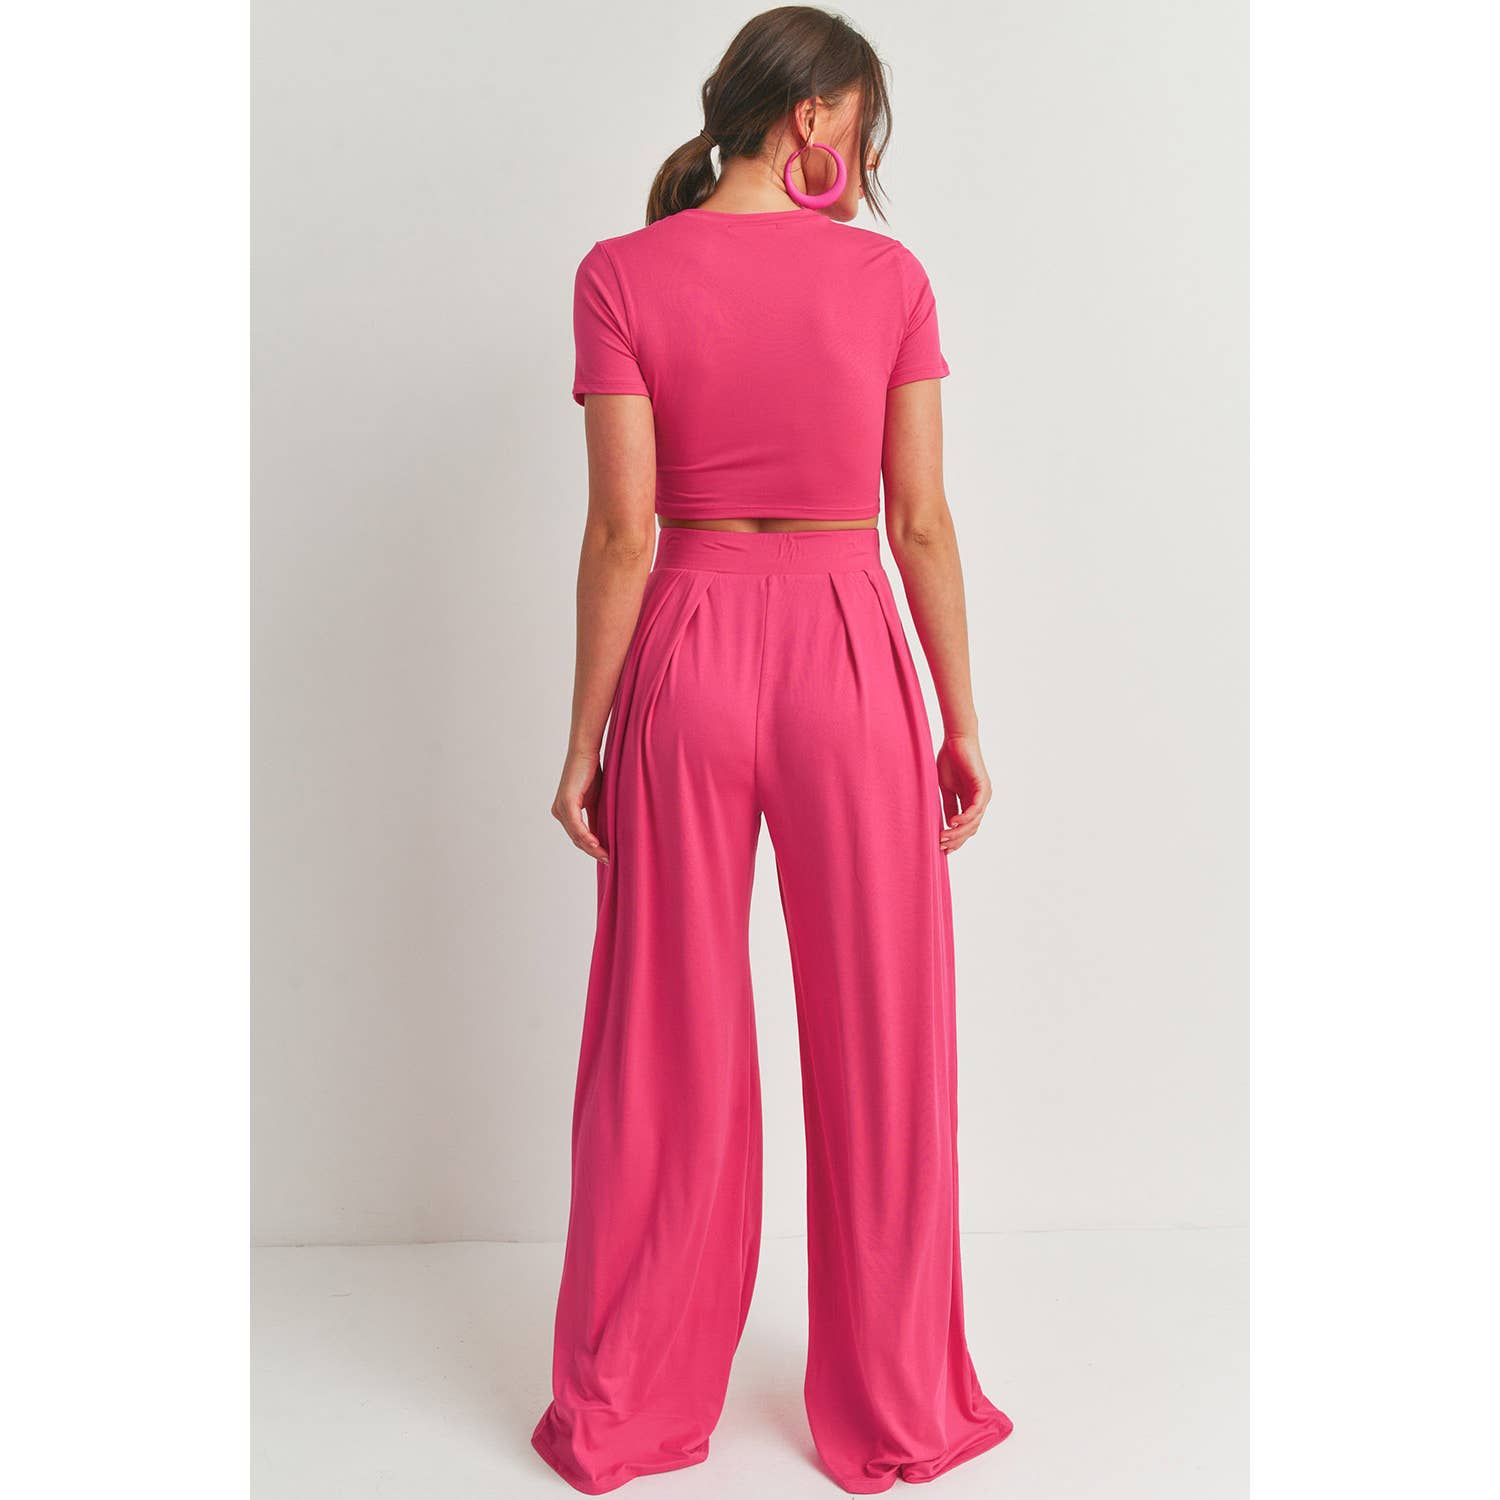 Pretty in Pink Palazzo Pant Set